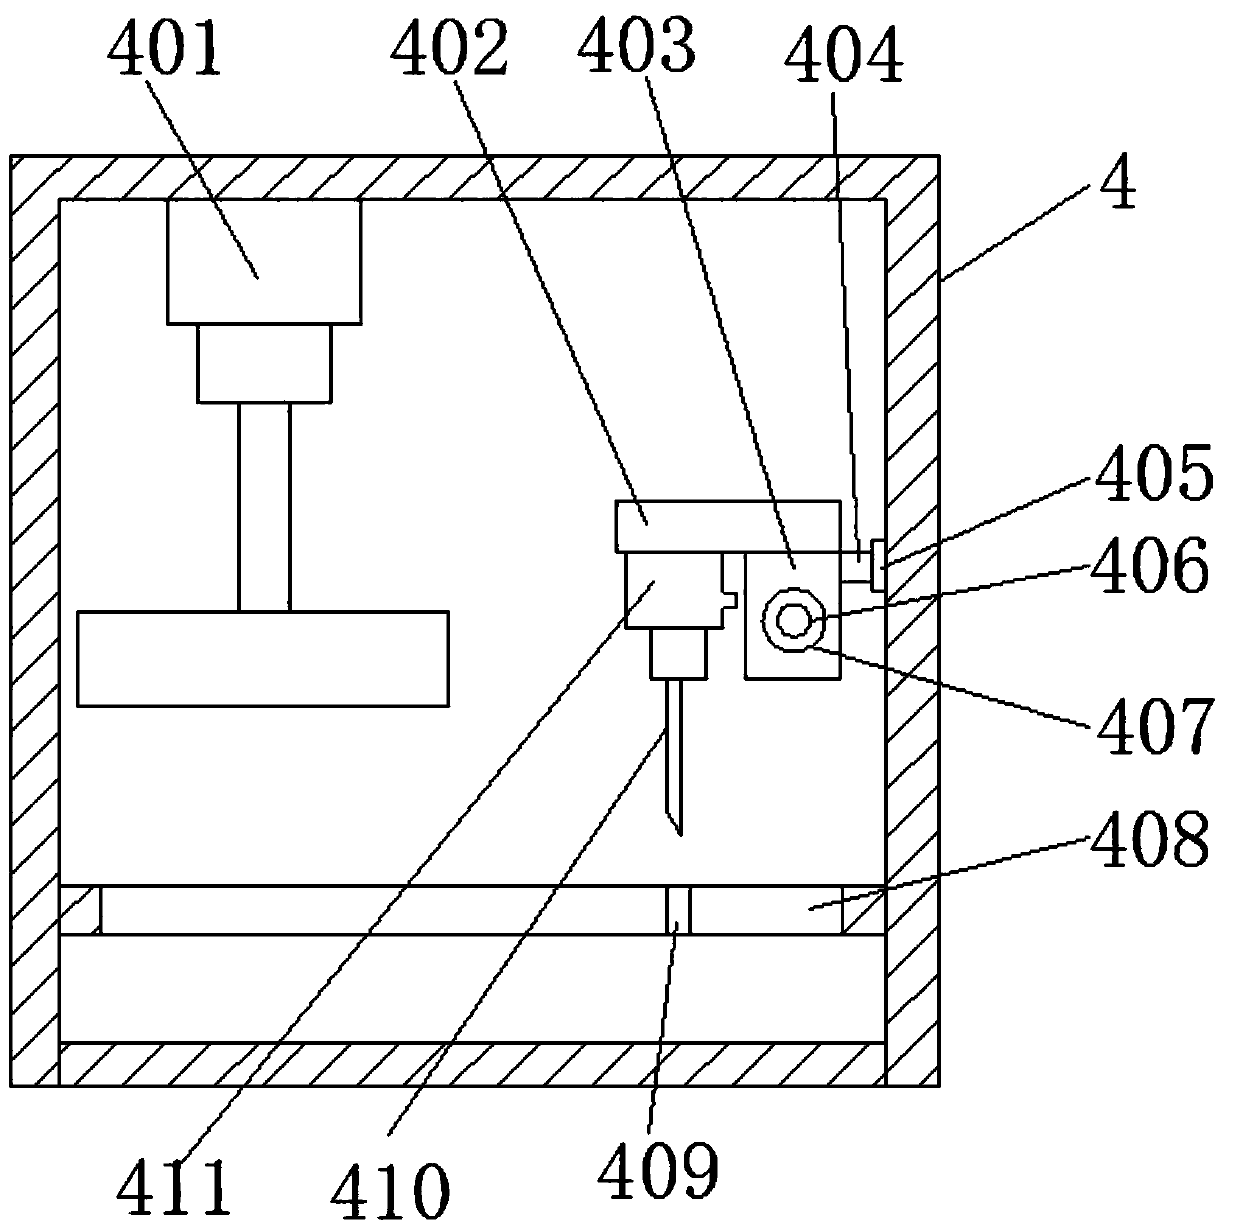 Fixed cloth cutting device